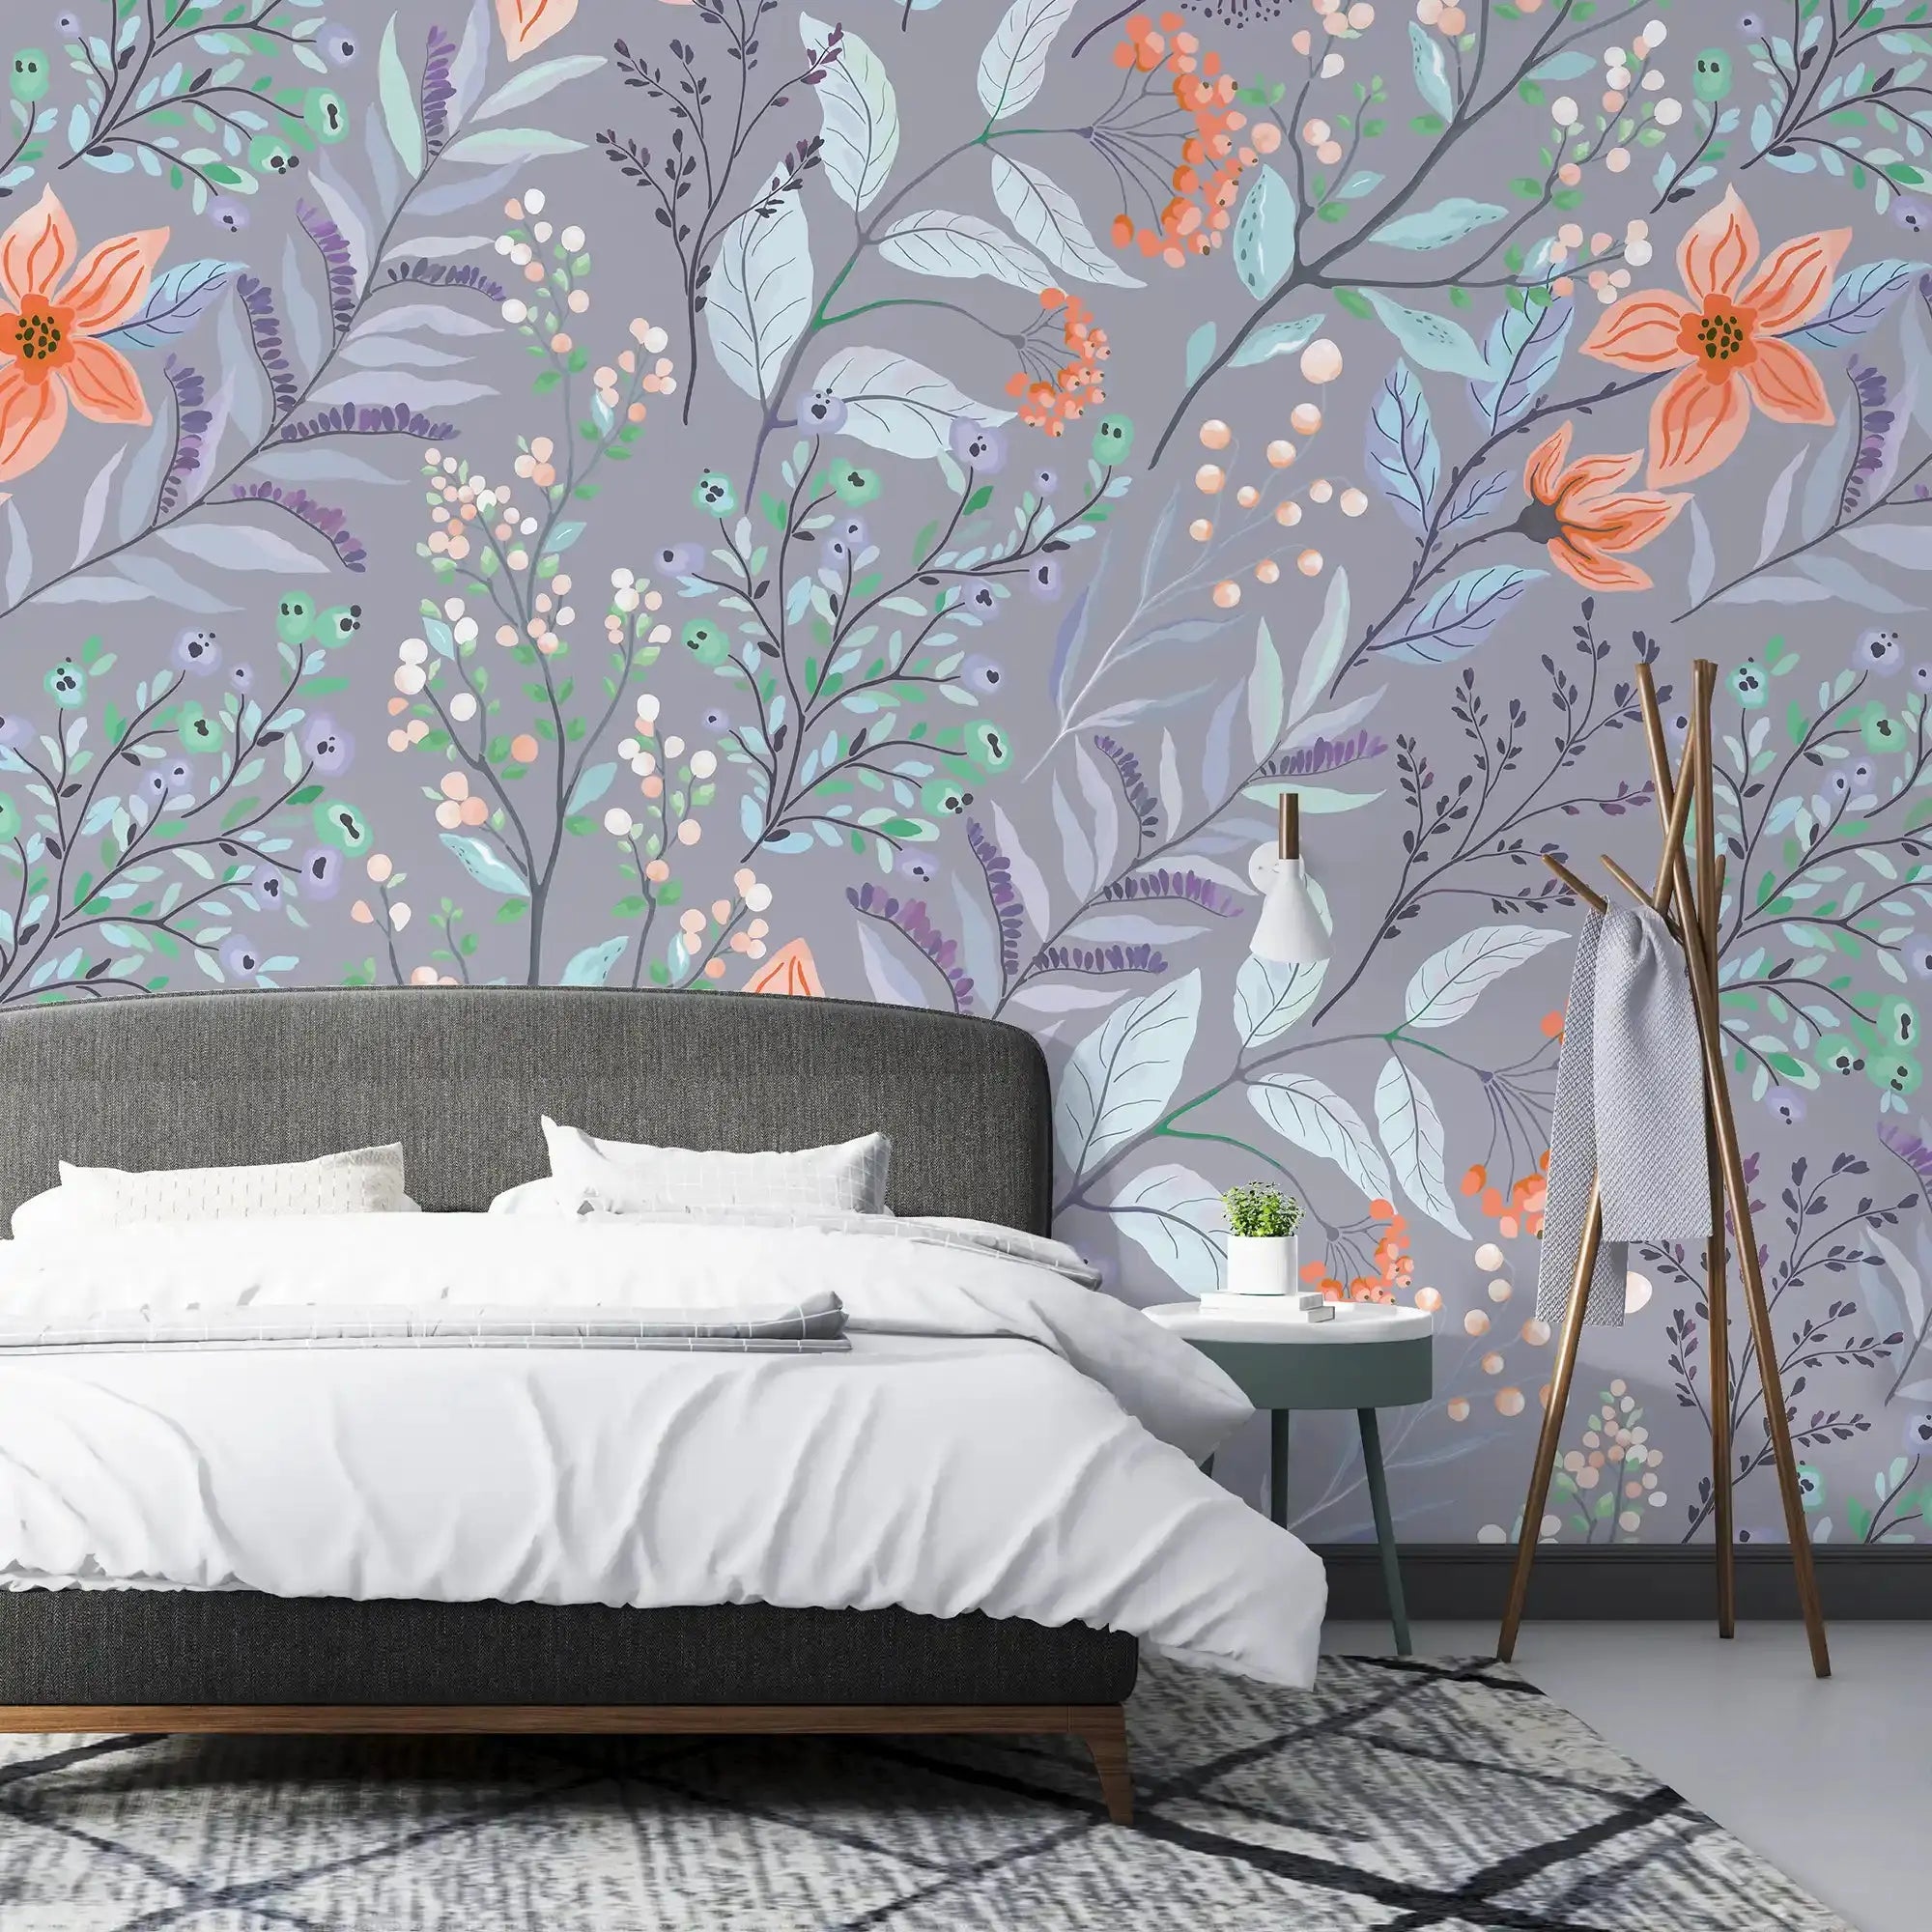 3105-C / Peel and Stick Floral Wallpaper: Pink Flowers and Leaf Design, Easy Apply Wall Decor for Bedroom & Bathroom - Artevella